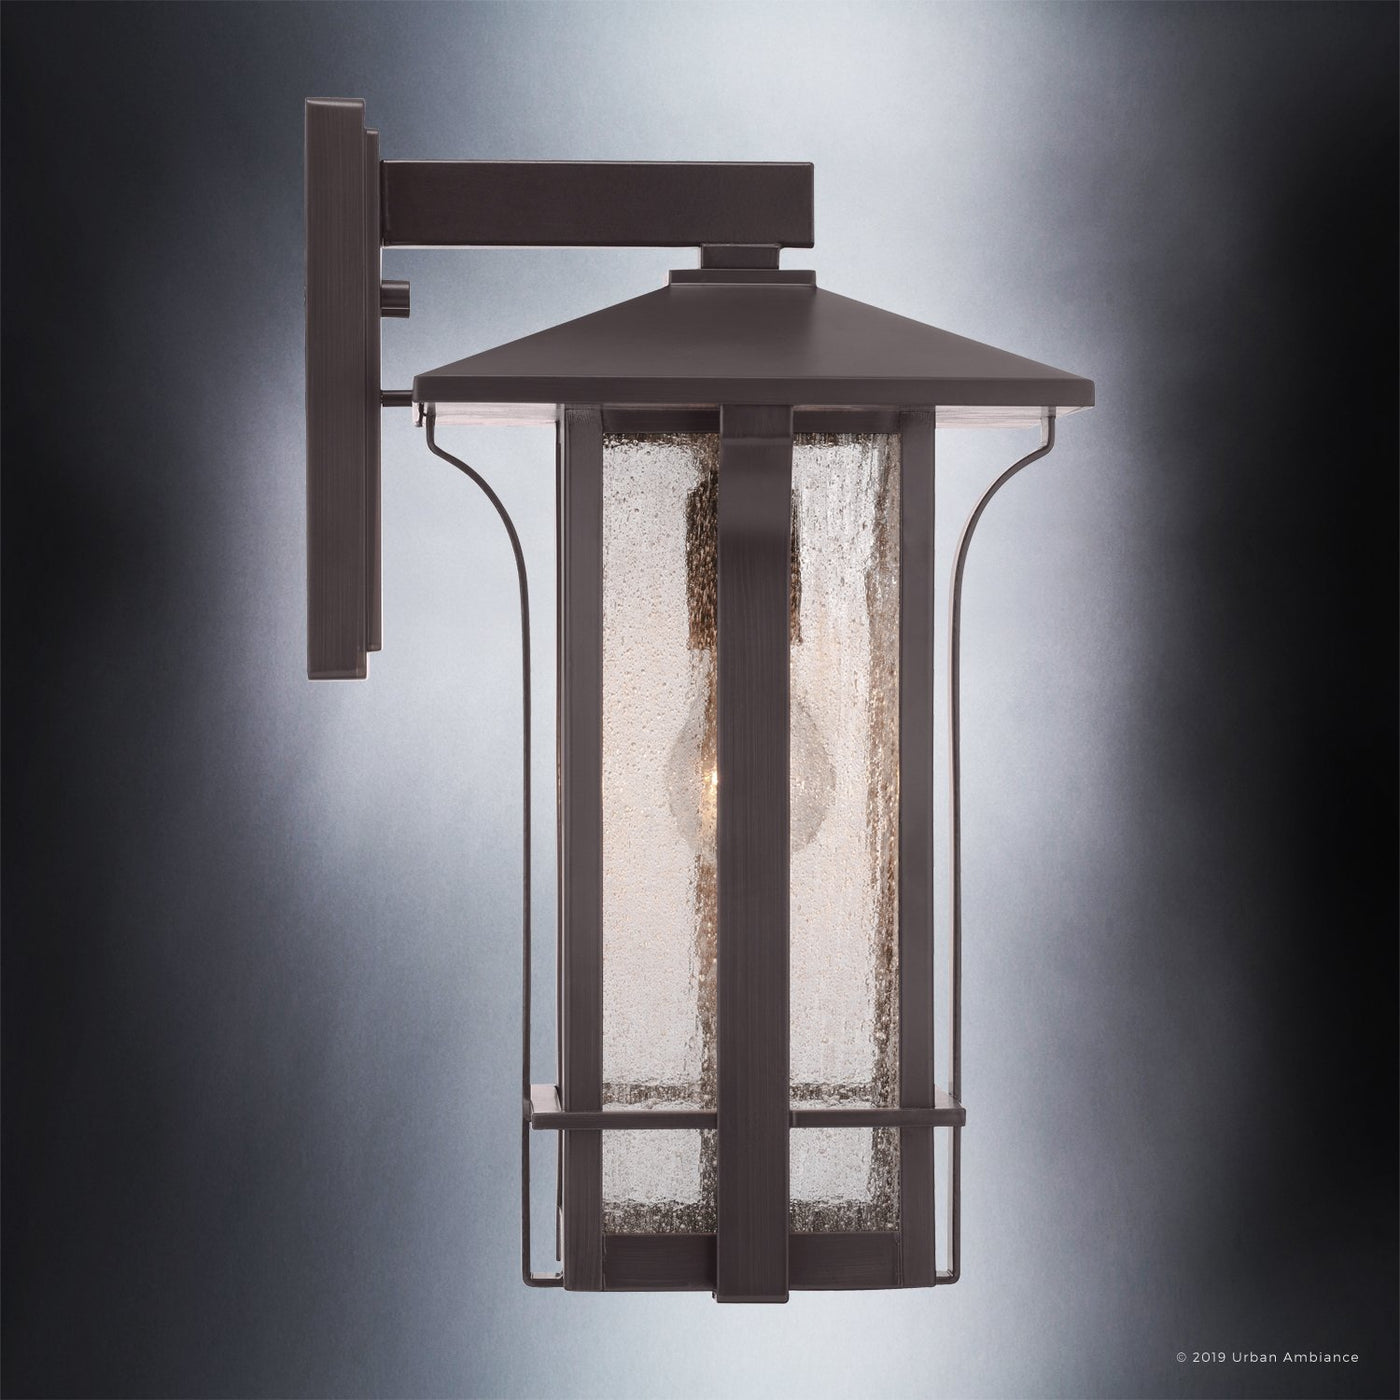 UHP1153 Craftsman Outdoor Wall Light, 16 x 9, Olde Bronze Finish, Essen Collection